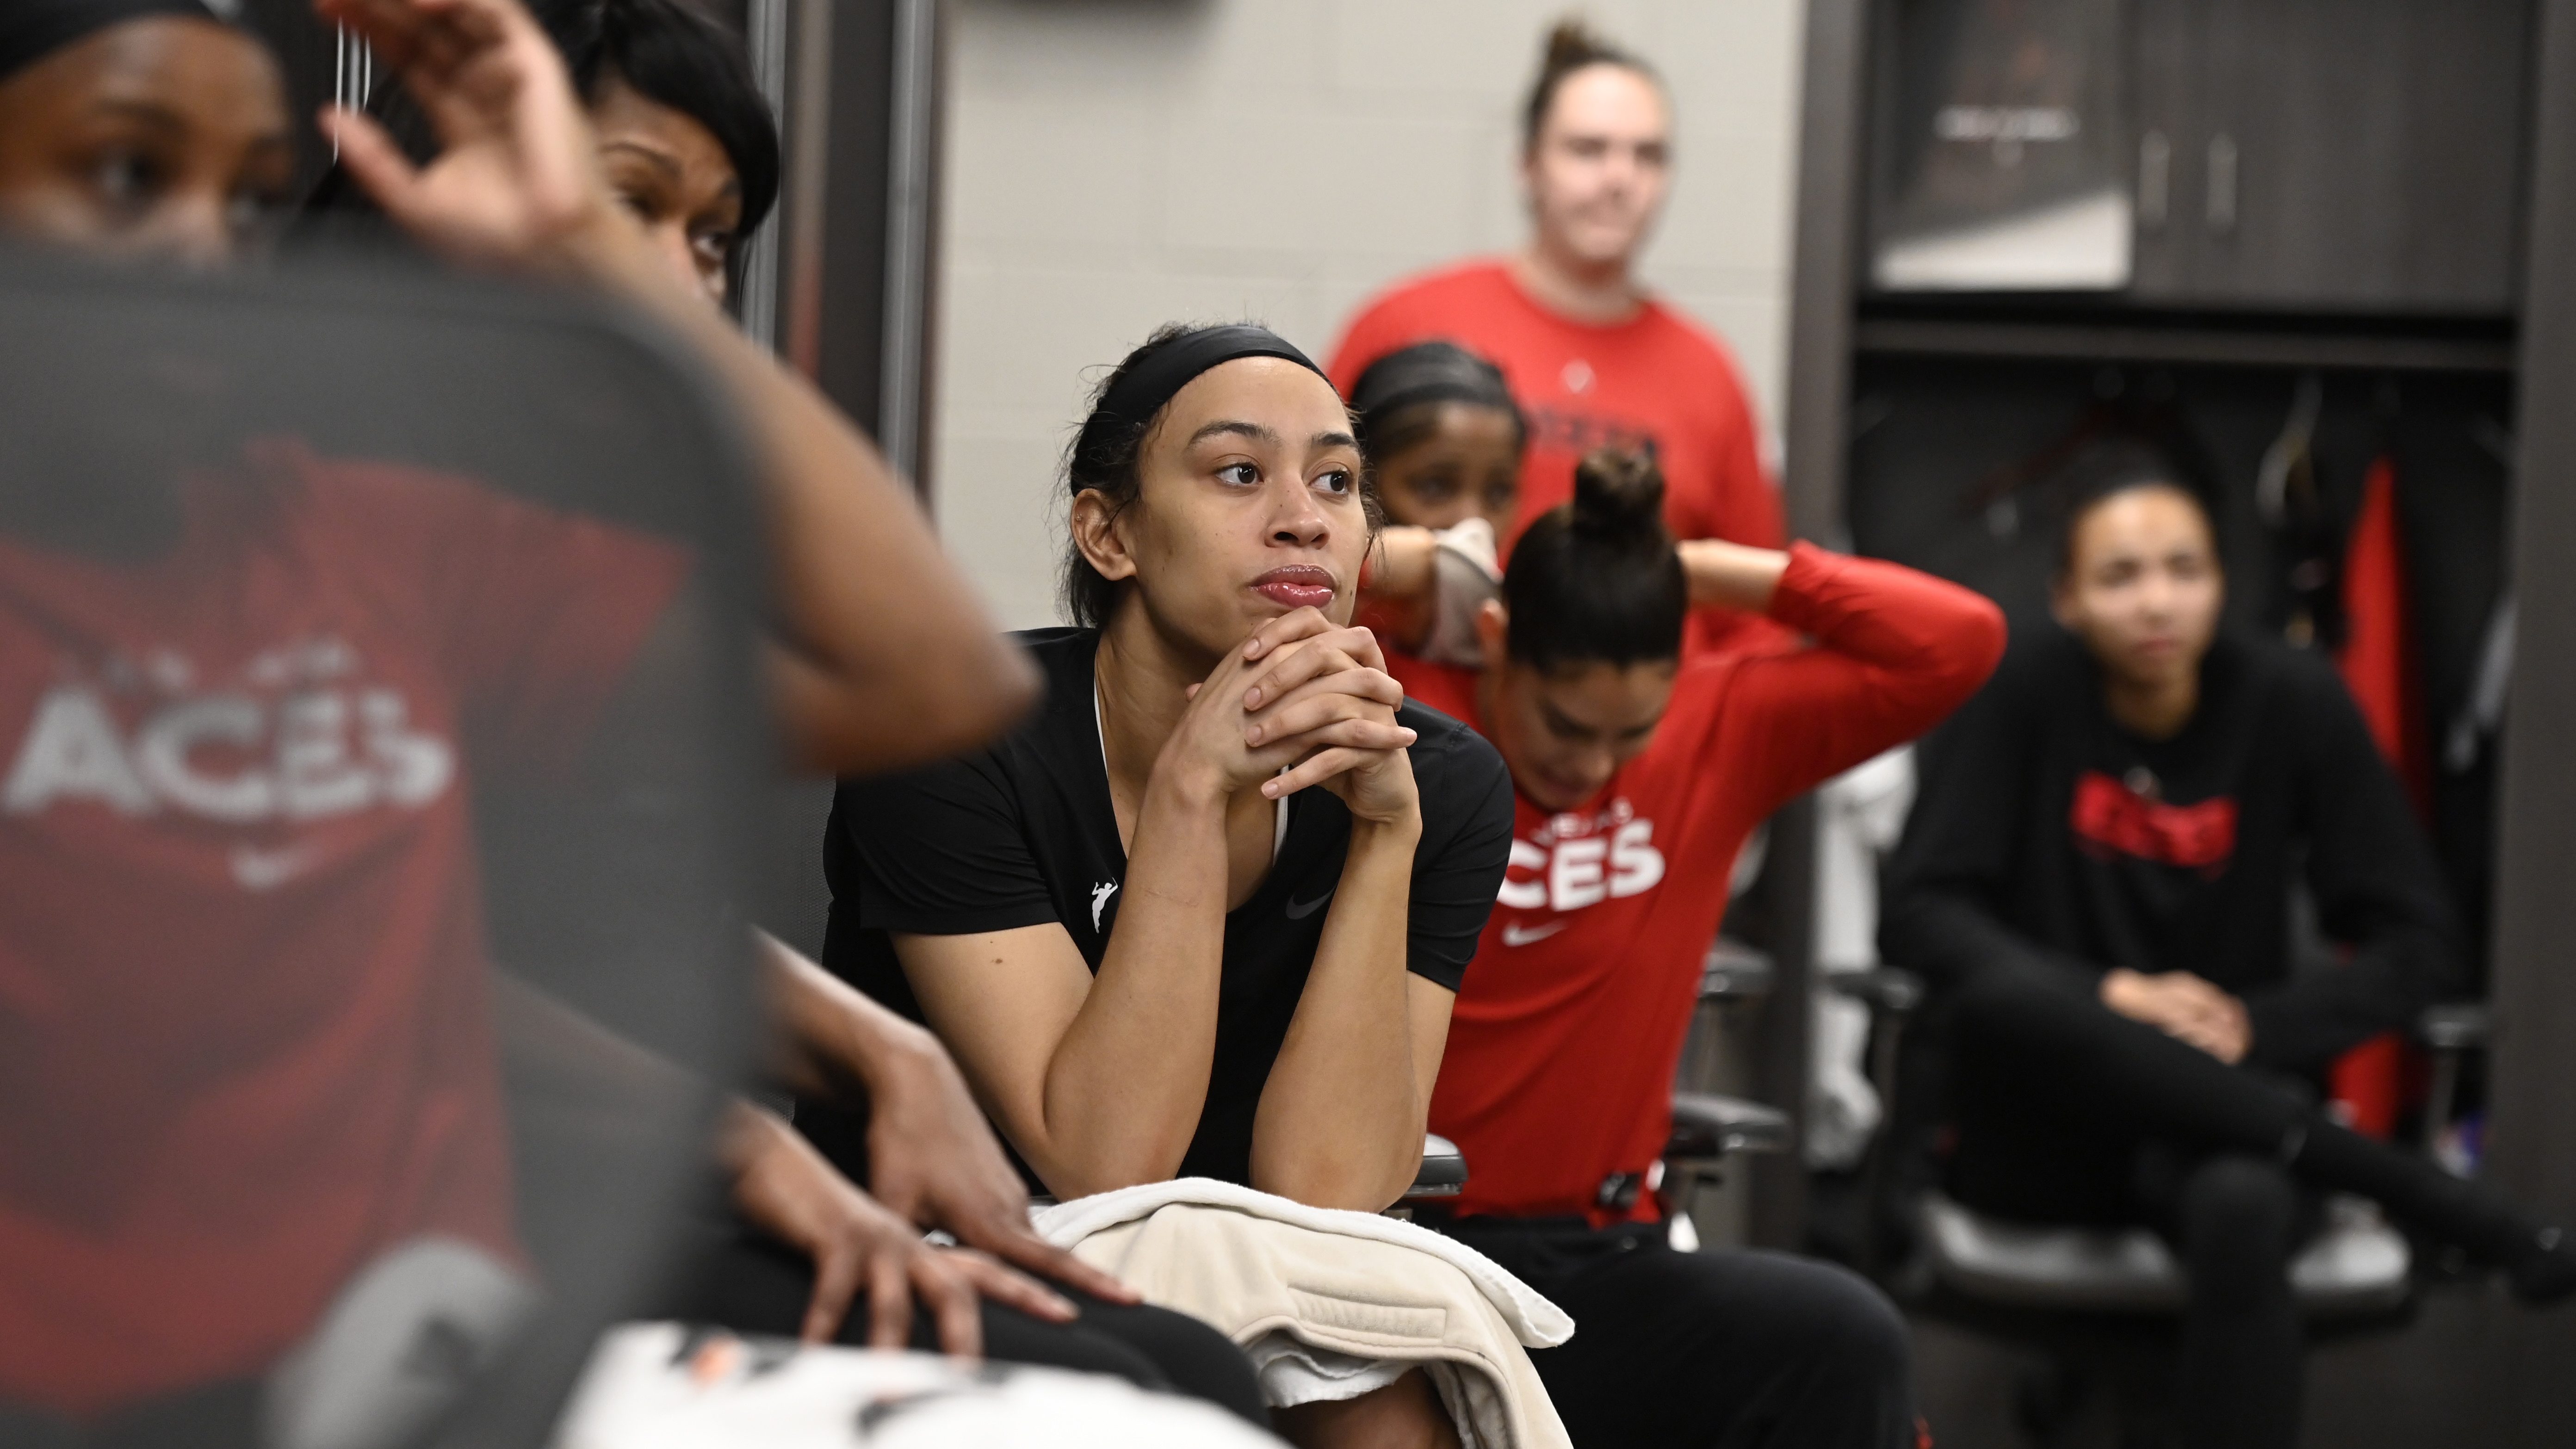 Las Vegas Aces sign forward Dearica Hamby to multi-year extension